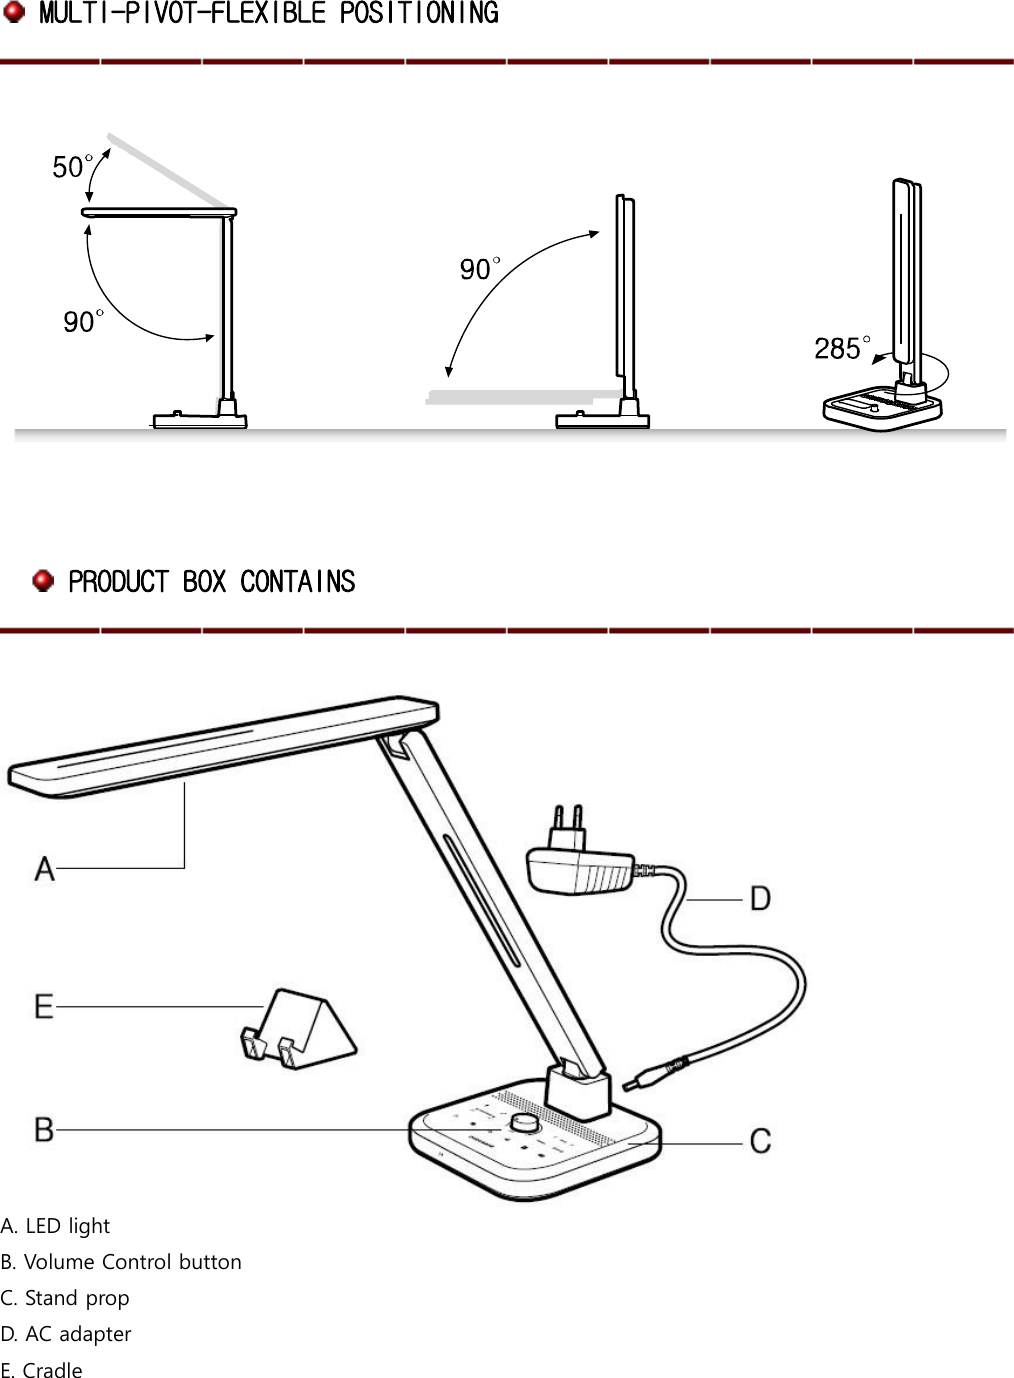  MULTI-PIVOT-FLEXIBLE POSITIONING               PRODUCT BOX CONTAINS   A. LED light B. Volume Control button C. Stand prop D. AC adapter E. Cradle 